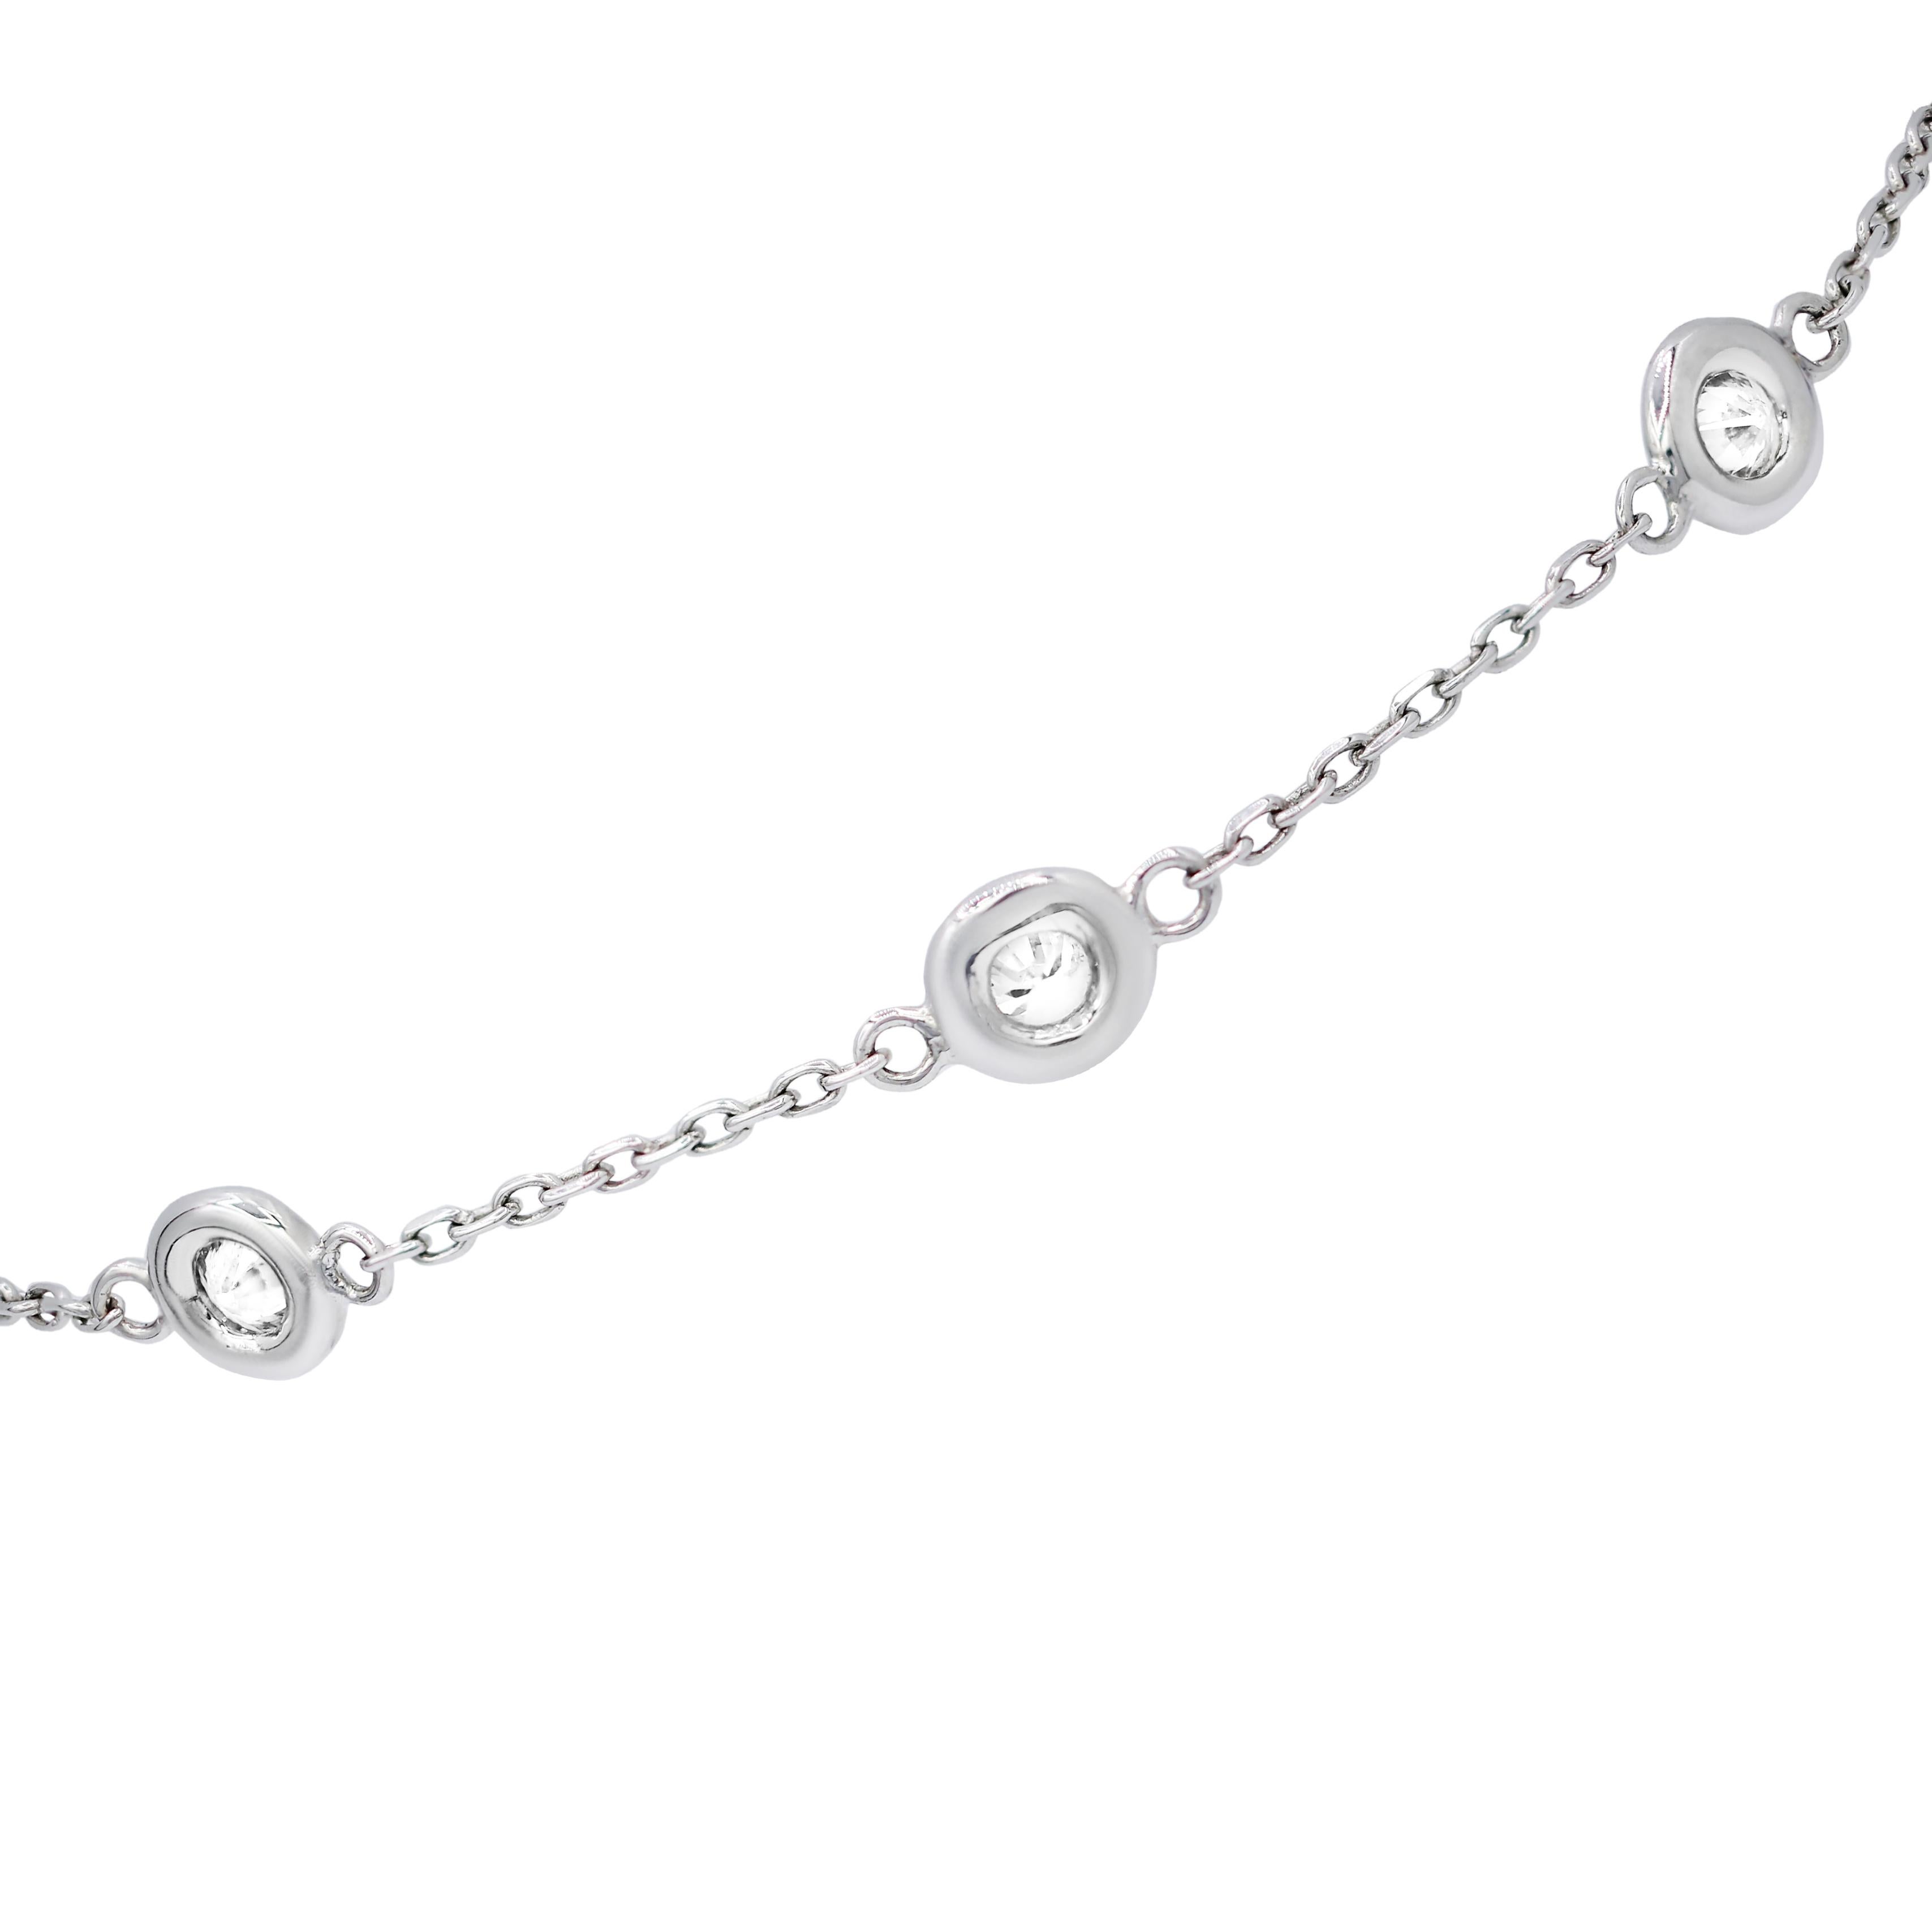 Round Cut Diana M. Diamonds by the yard bracelet totaling 0.50 carats set in 14 kt WG For Sale